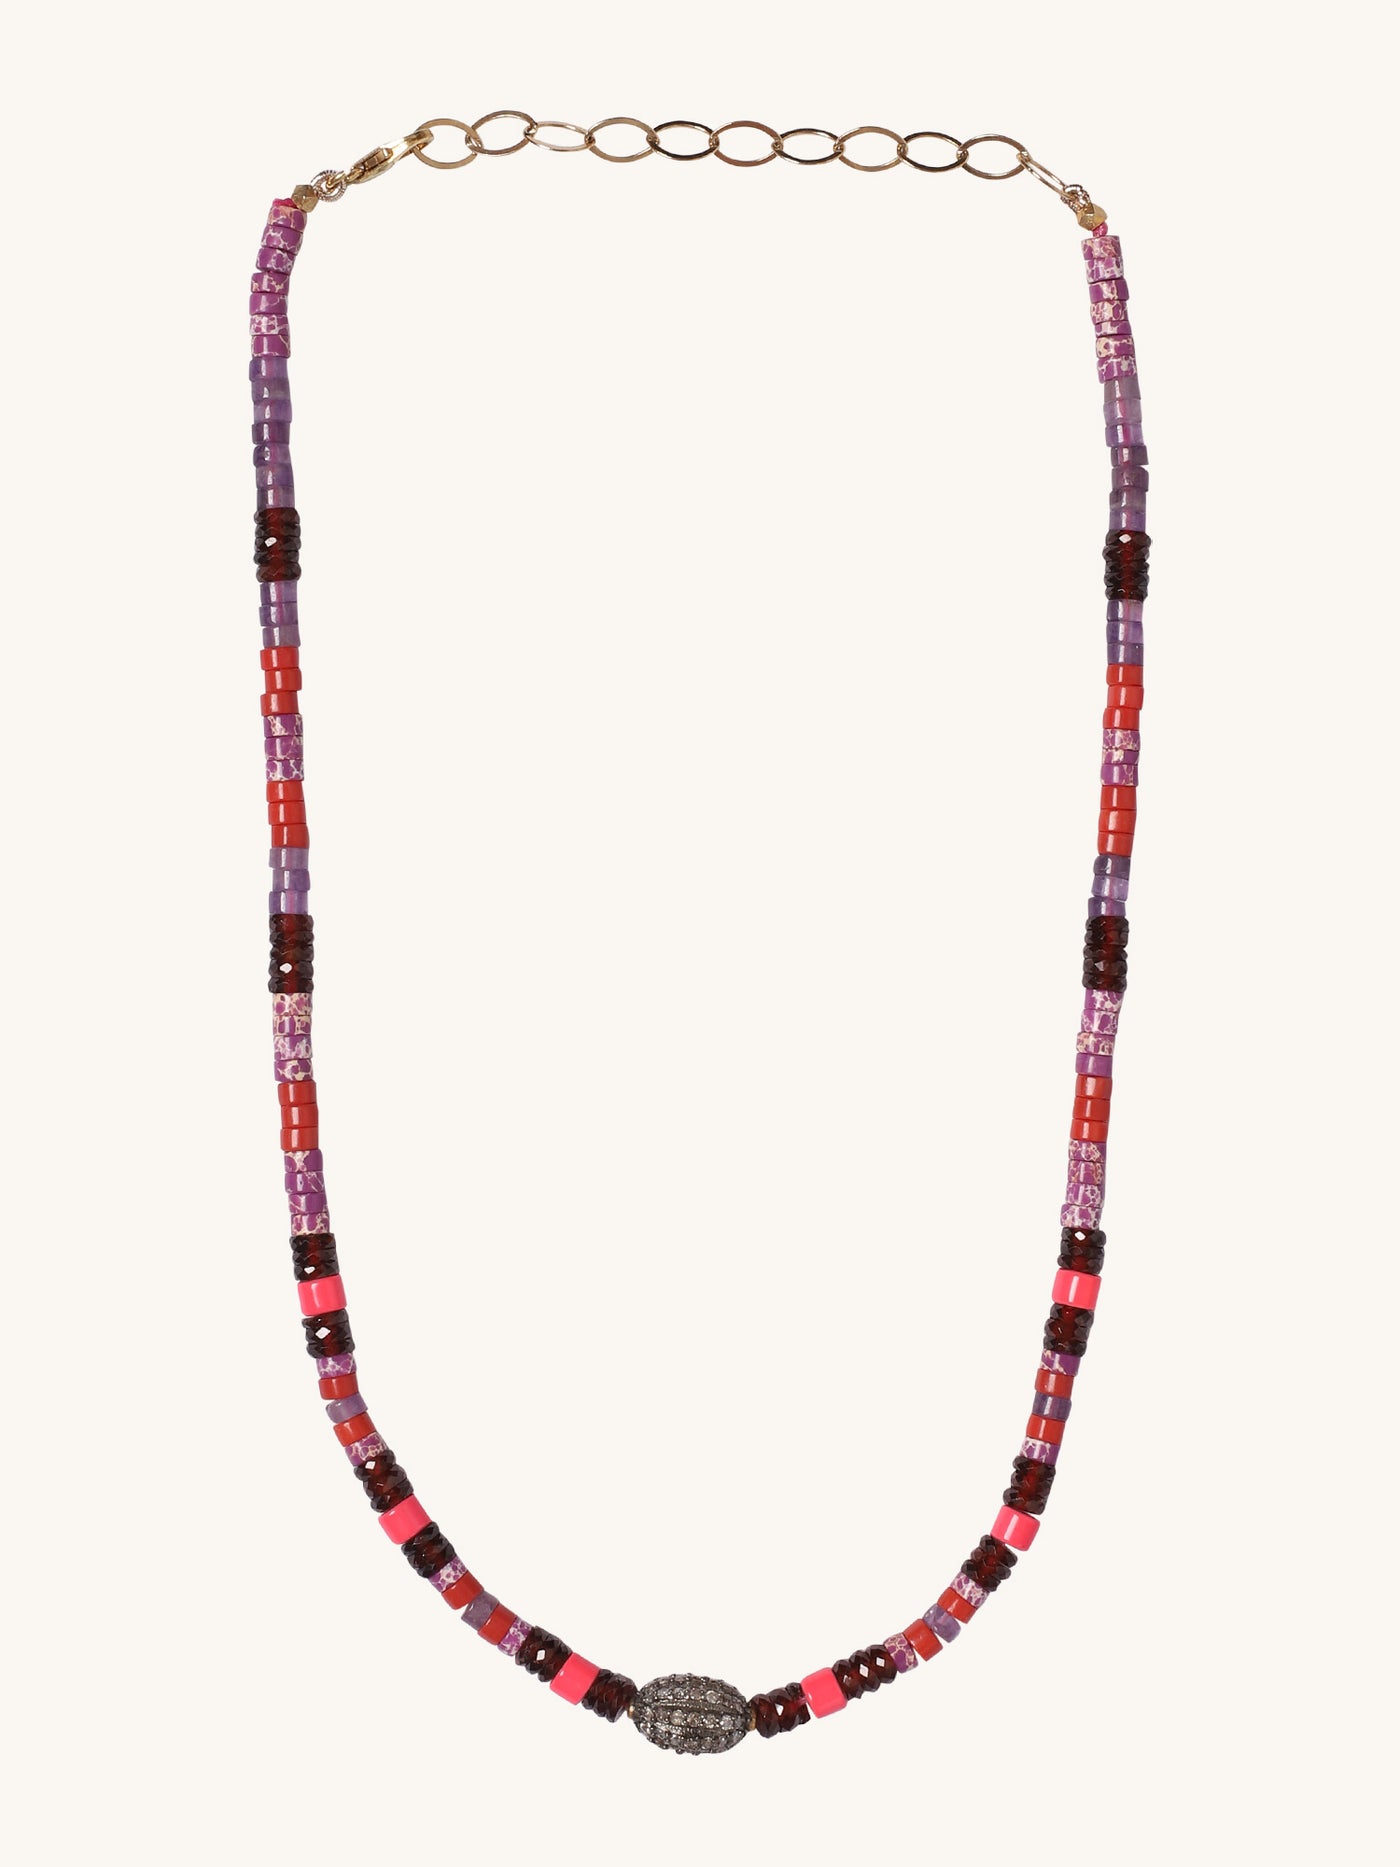 The Candy Collection Beaded Necklace